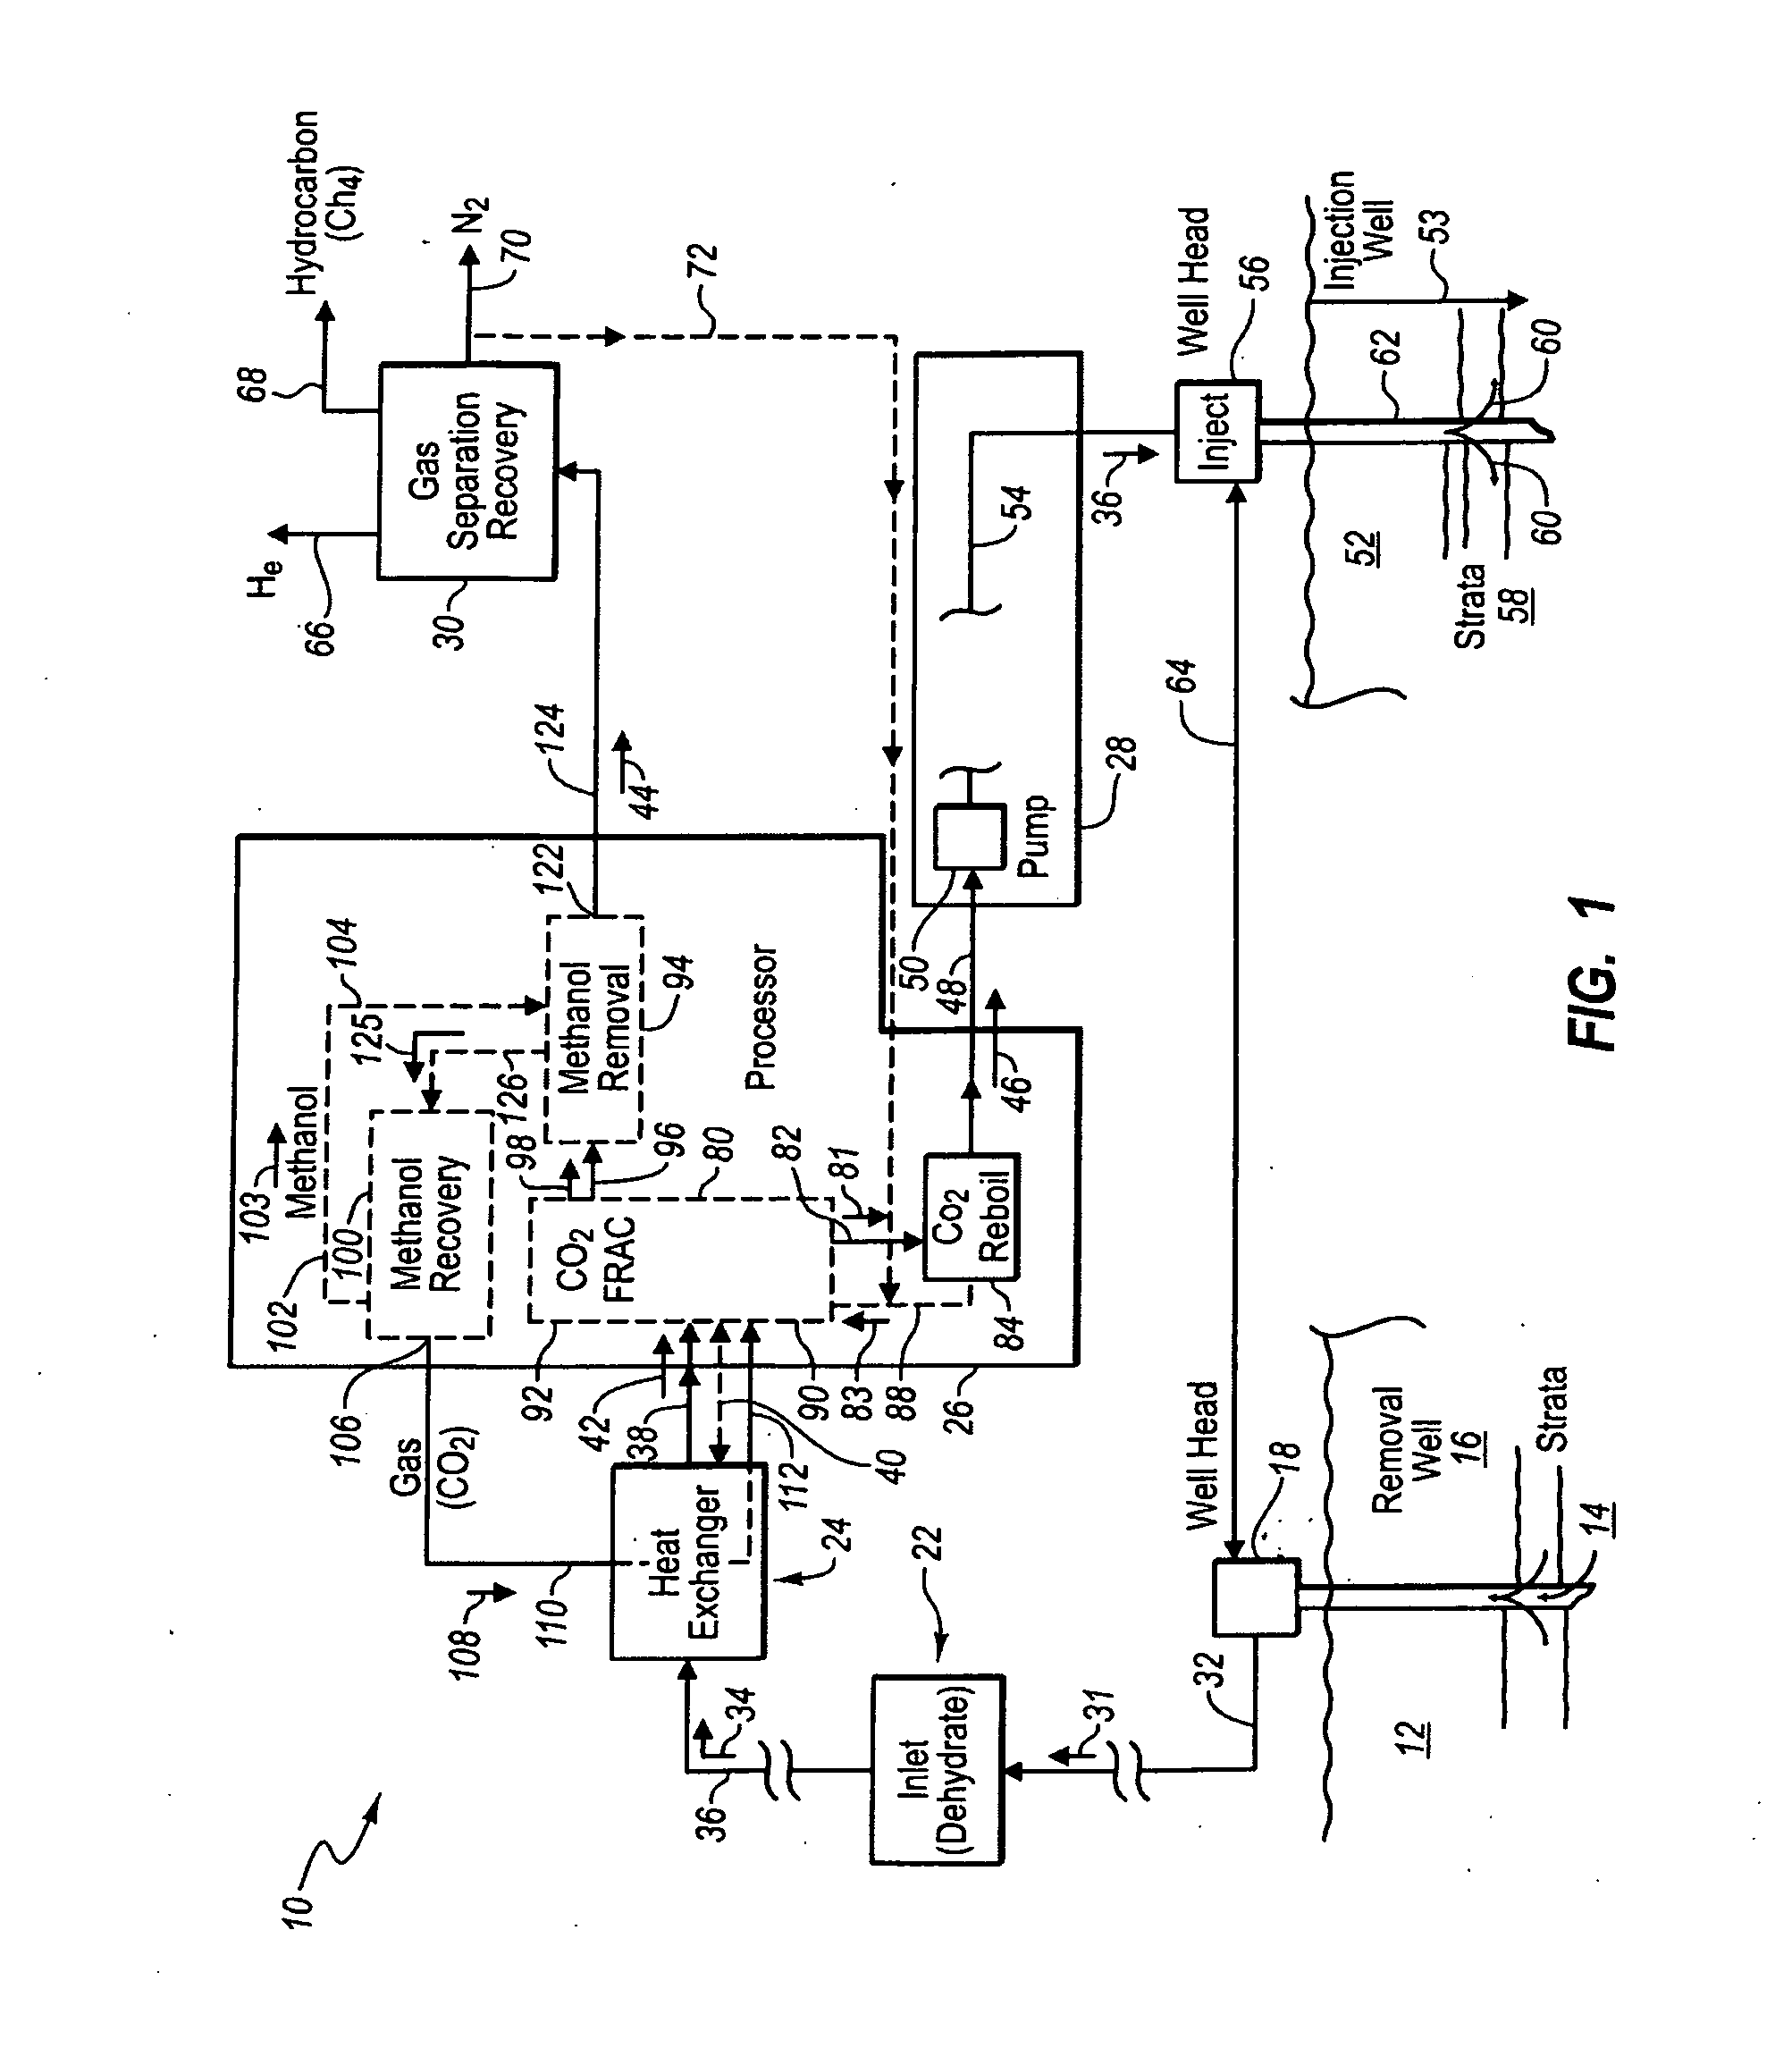 System for Separating a Waste Liquid from a Produced Gas and Injecting the Waste Liquid into a Well